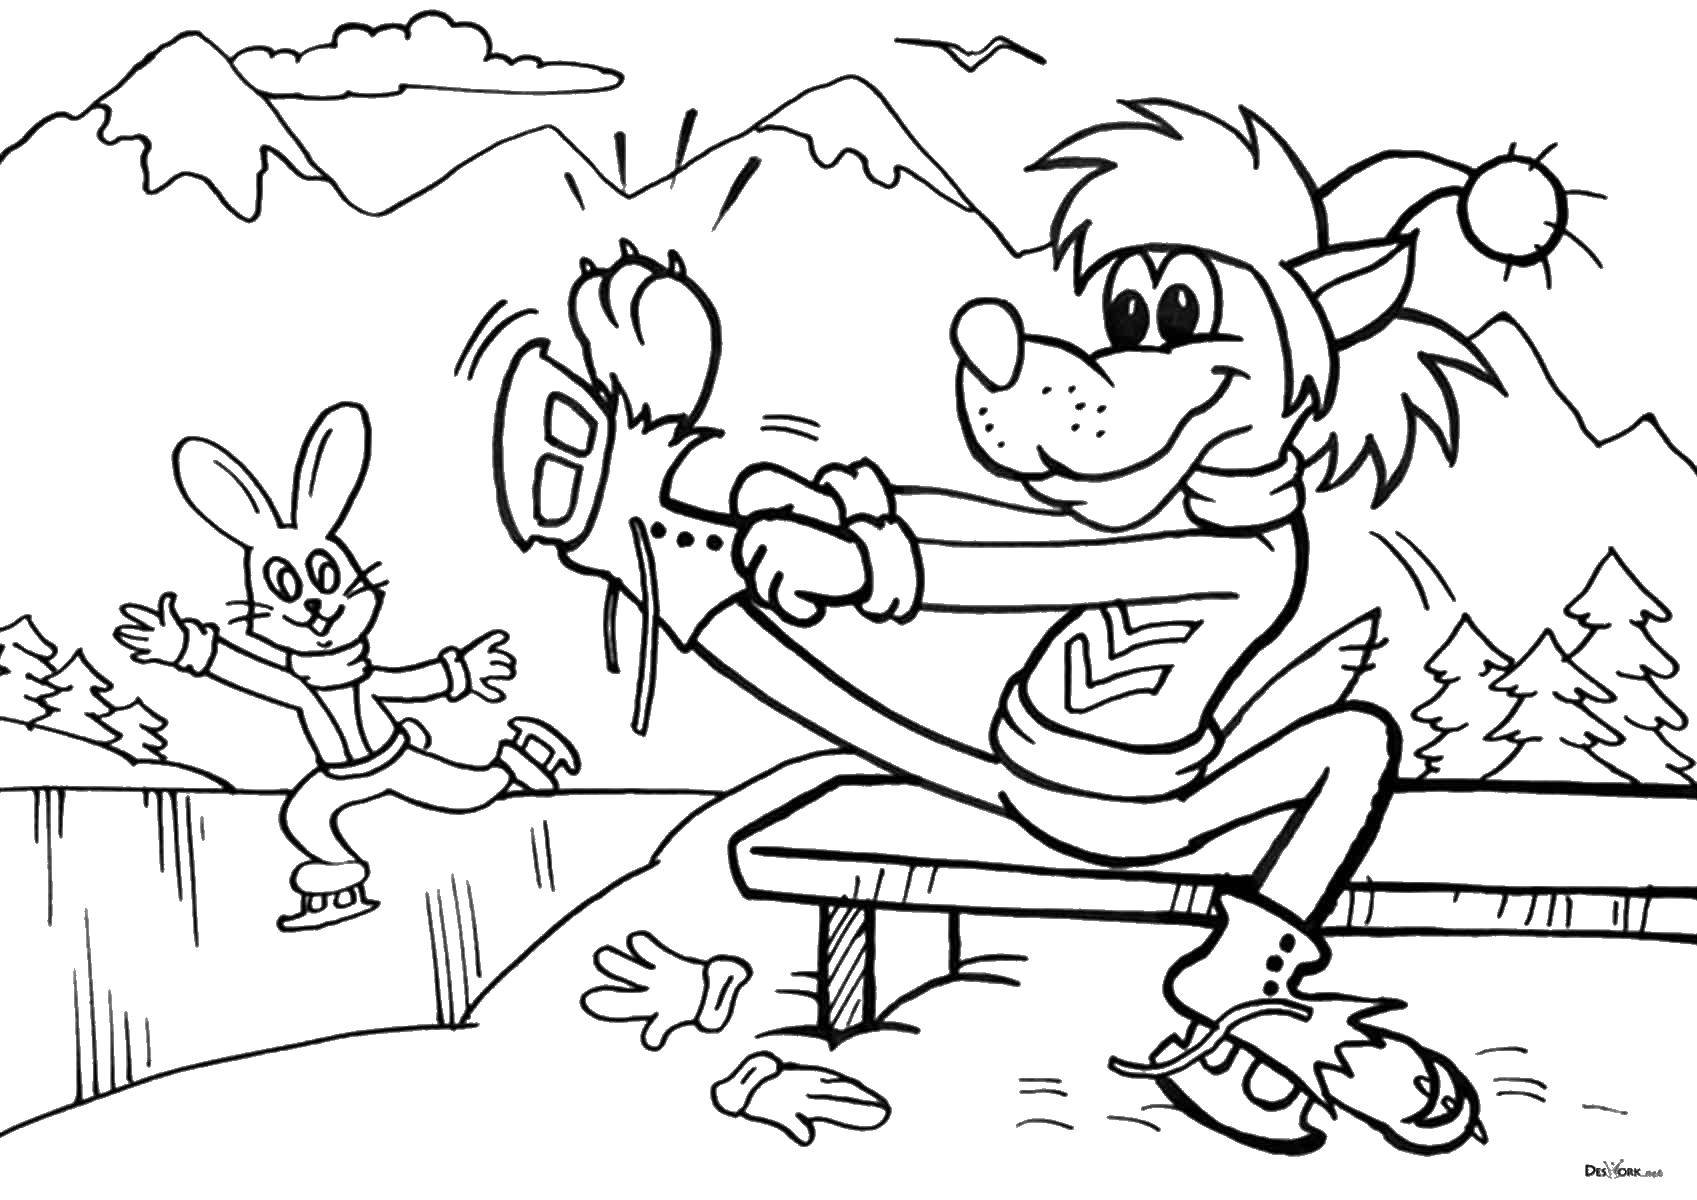 Coloring The wolf and the hare at the rink. Category just wait. Tags:  wolf, rabbit, skating, ice.